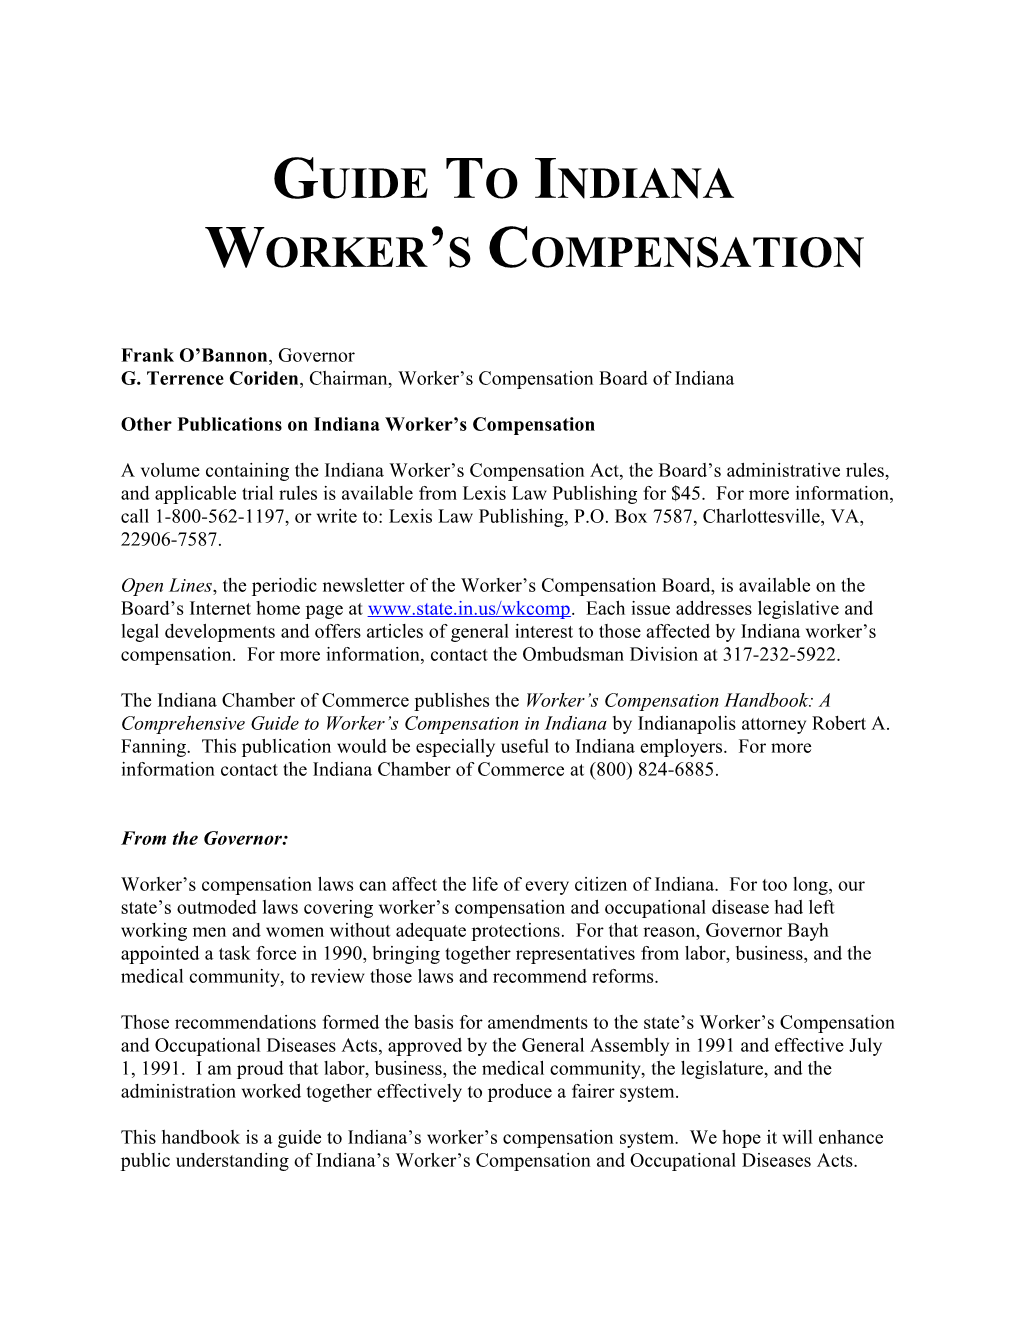 Guide to Indiana